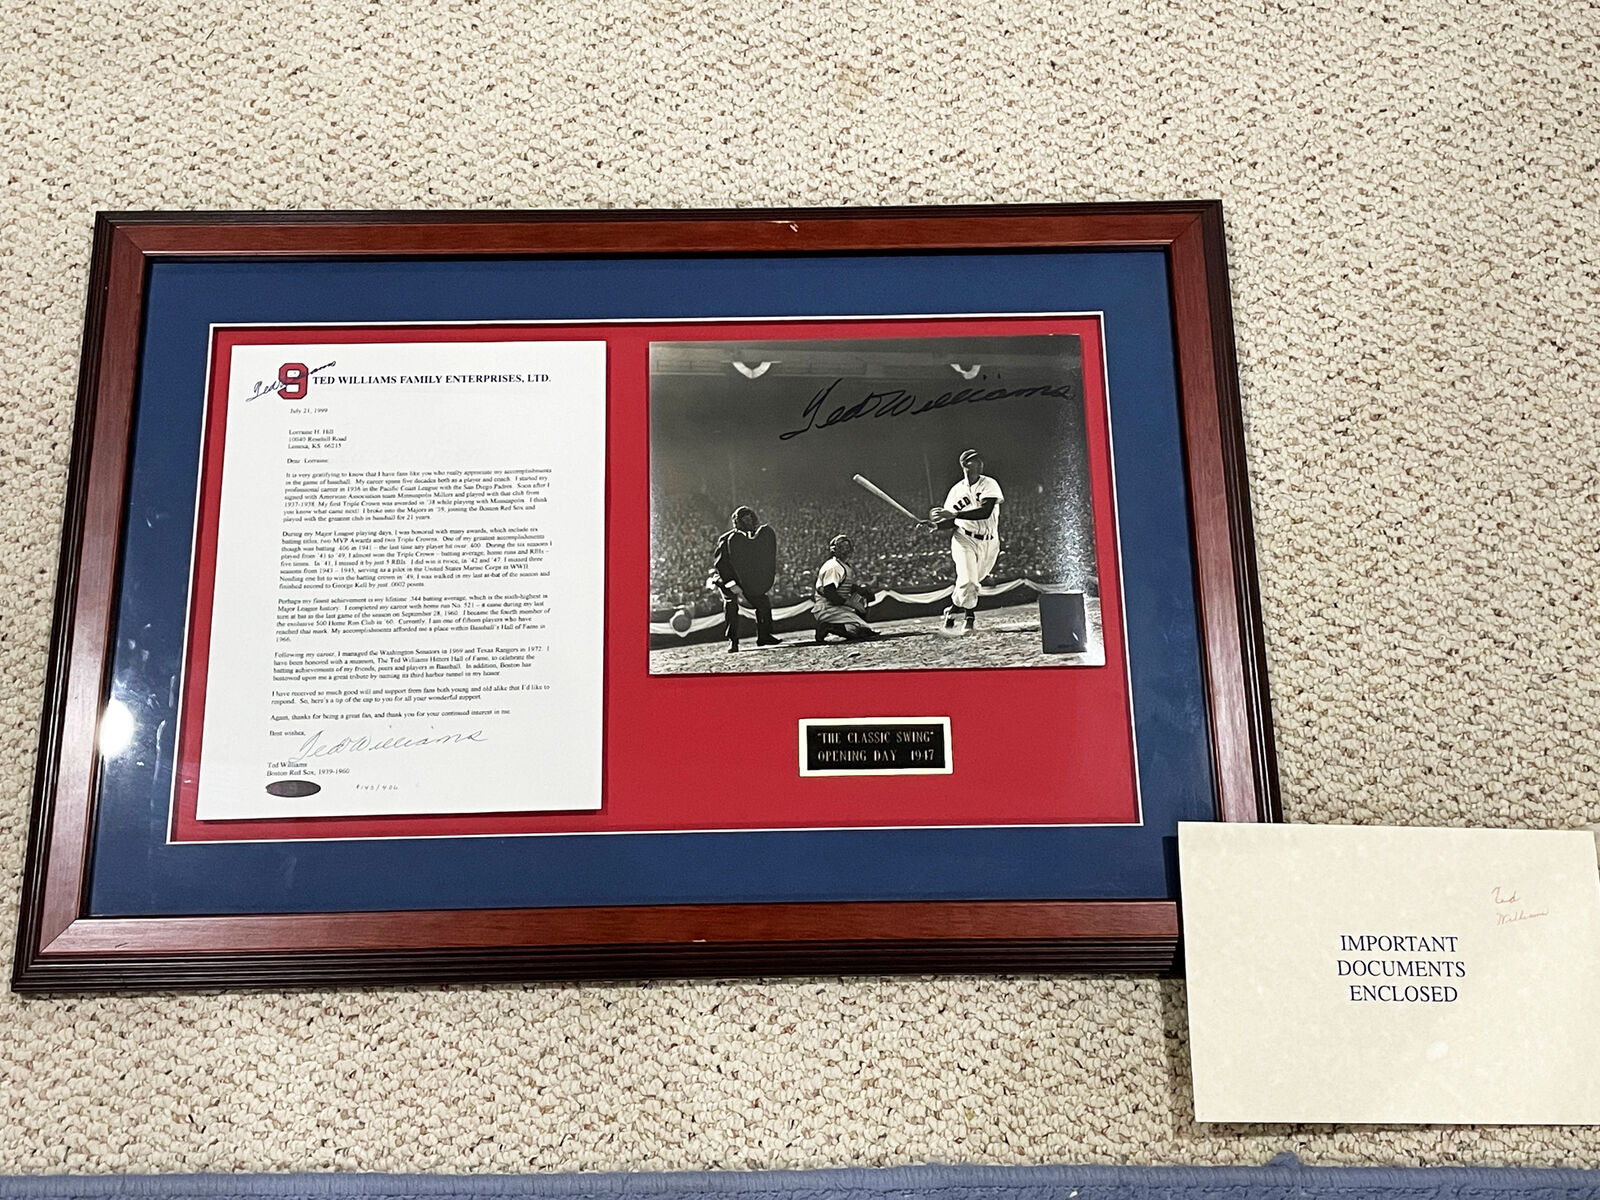 TED WILLIAMS AUTOGRAPHED PHOTO & LETTER - OPENING DAY 1947 - COA